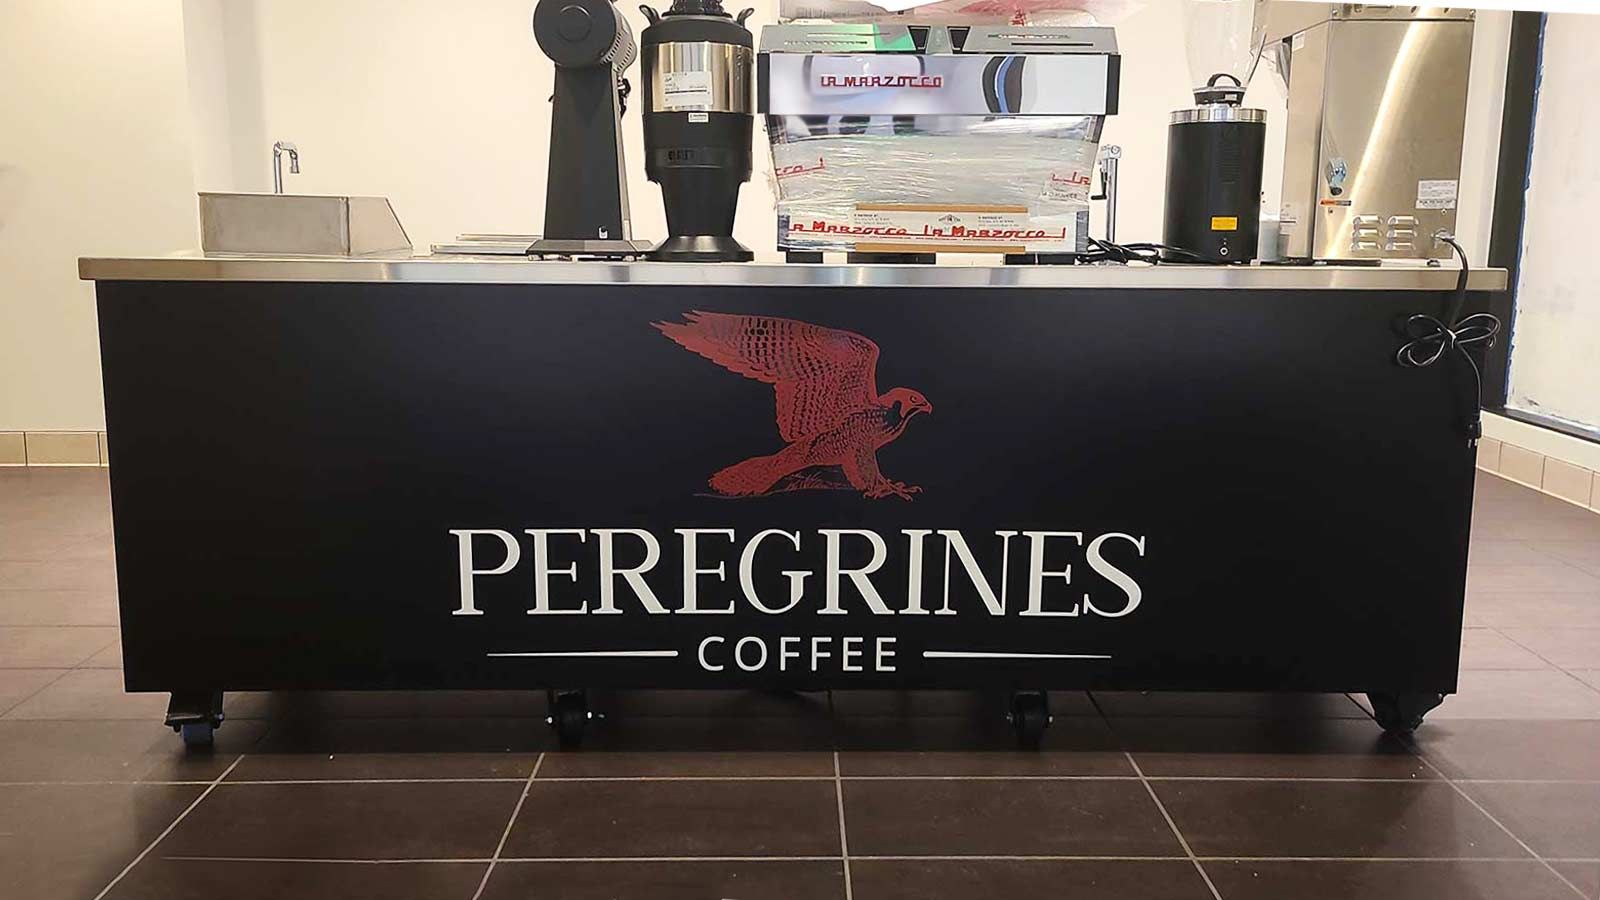 Peregrines Coffee custom decal attached to the bar